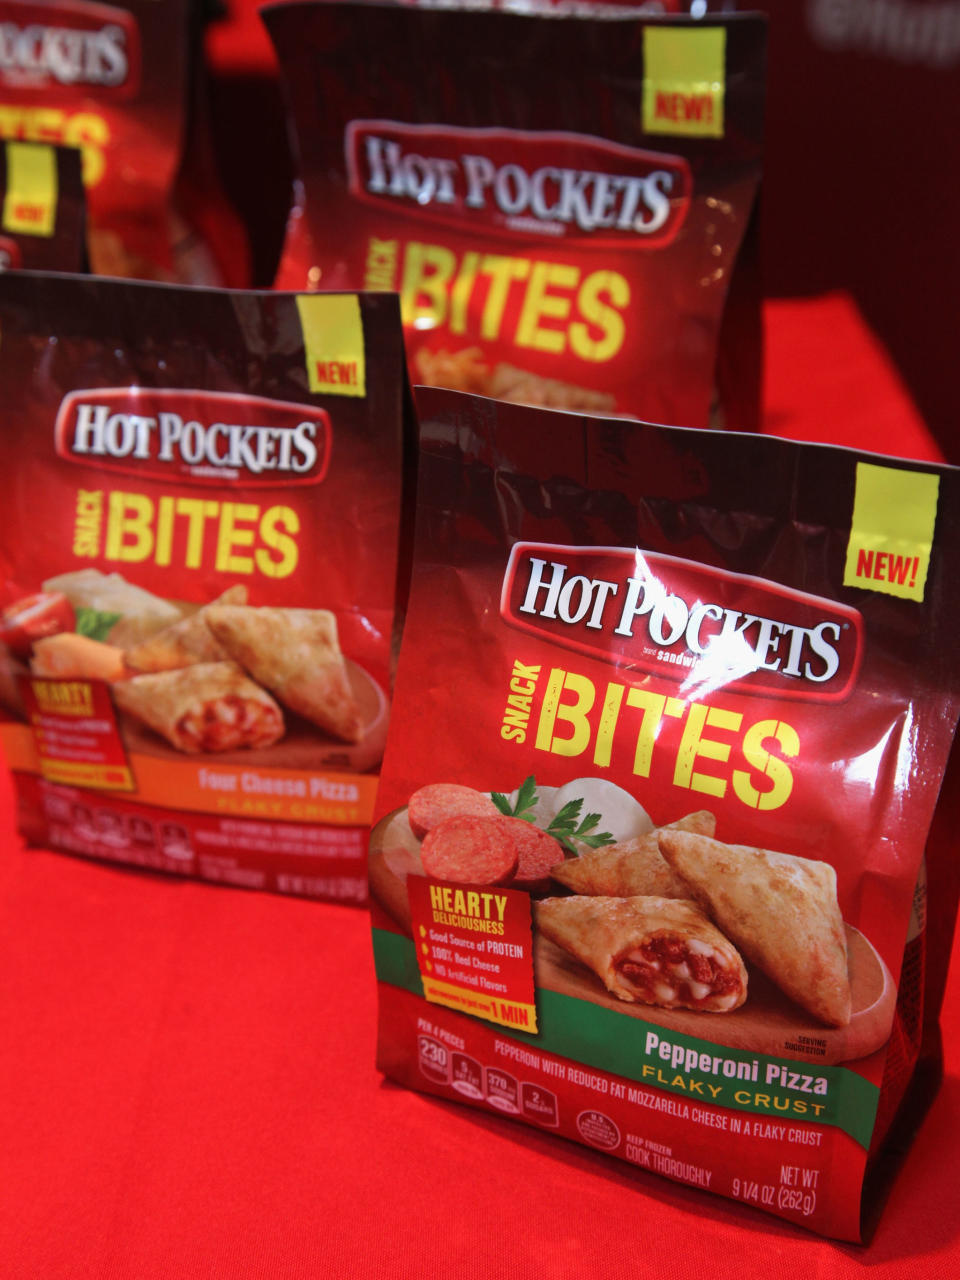 Now there are snack-size pockets.